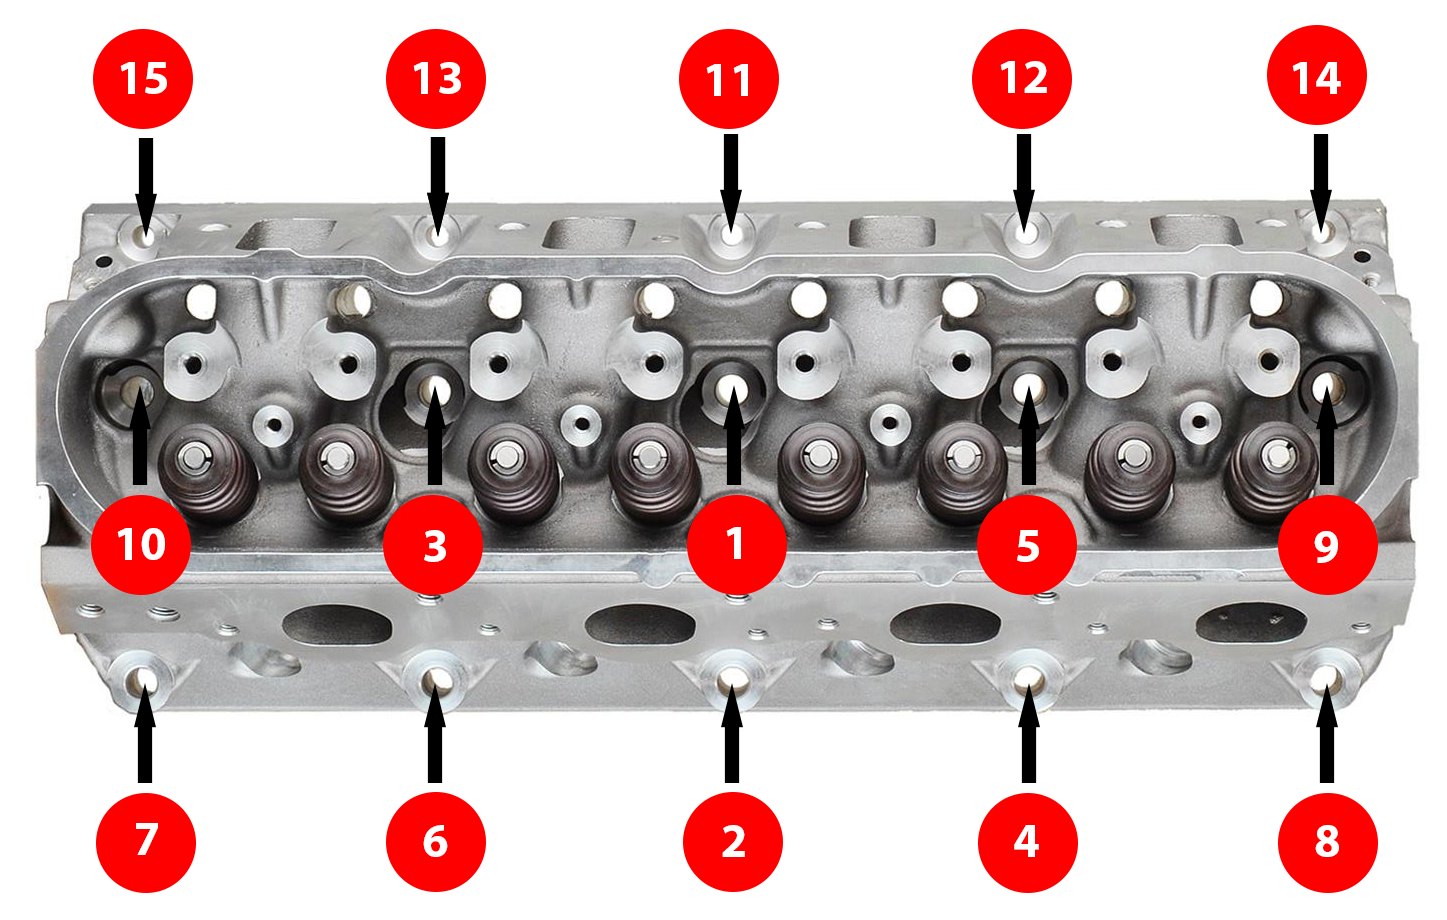 How do I install my LS cylinder heads? · Help Center